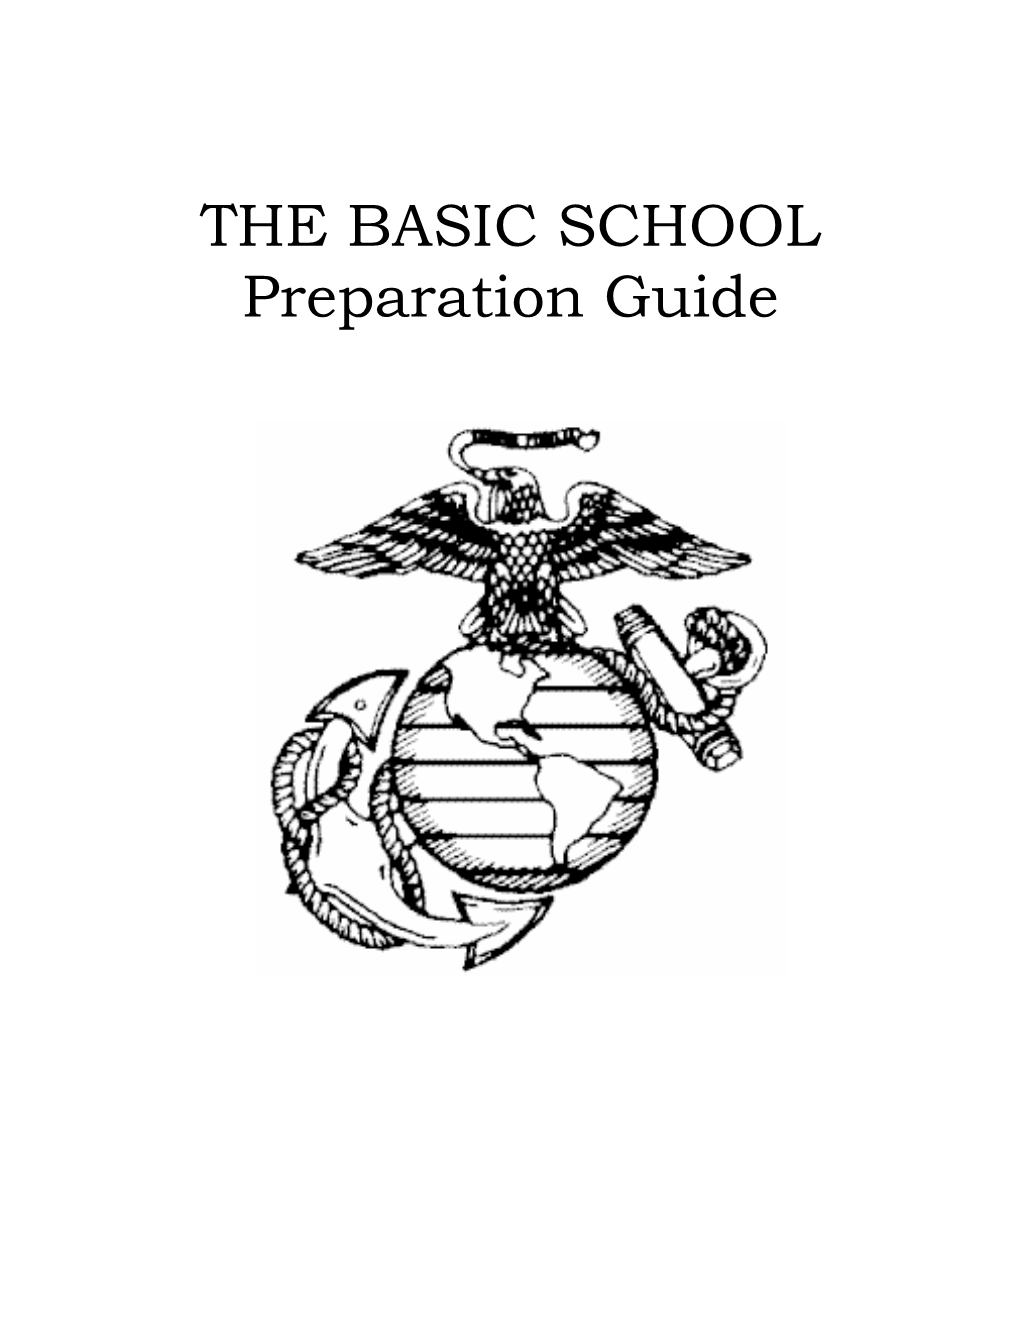 THE BASIC SCHOOL Preparation Guide